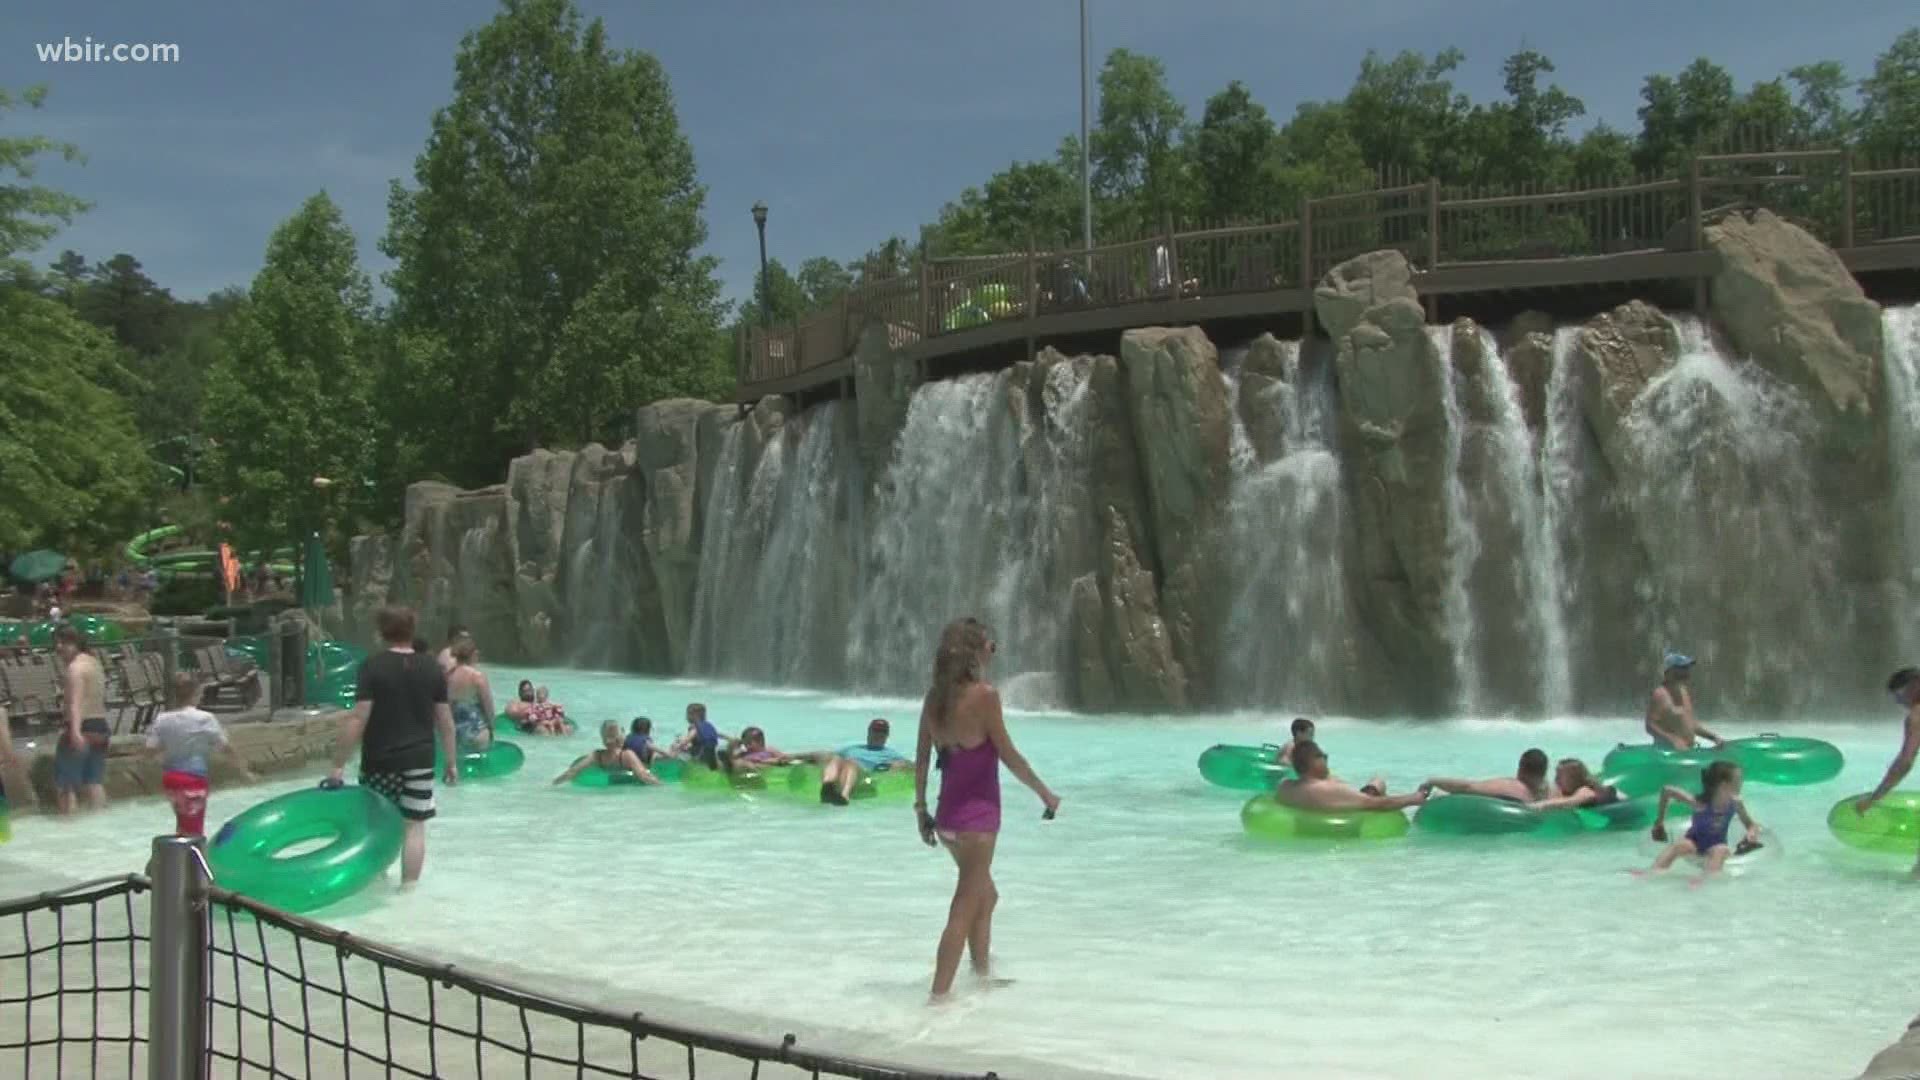 Dollywood said it's a breath of fresh air for people to be back at the park. After a tough 2020, many also felt that way while enjoying some sun and fun.